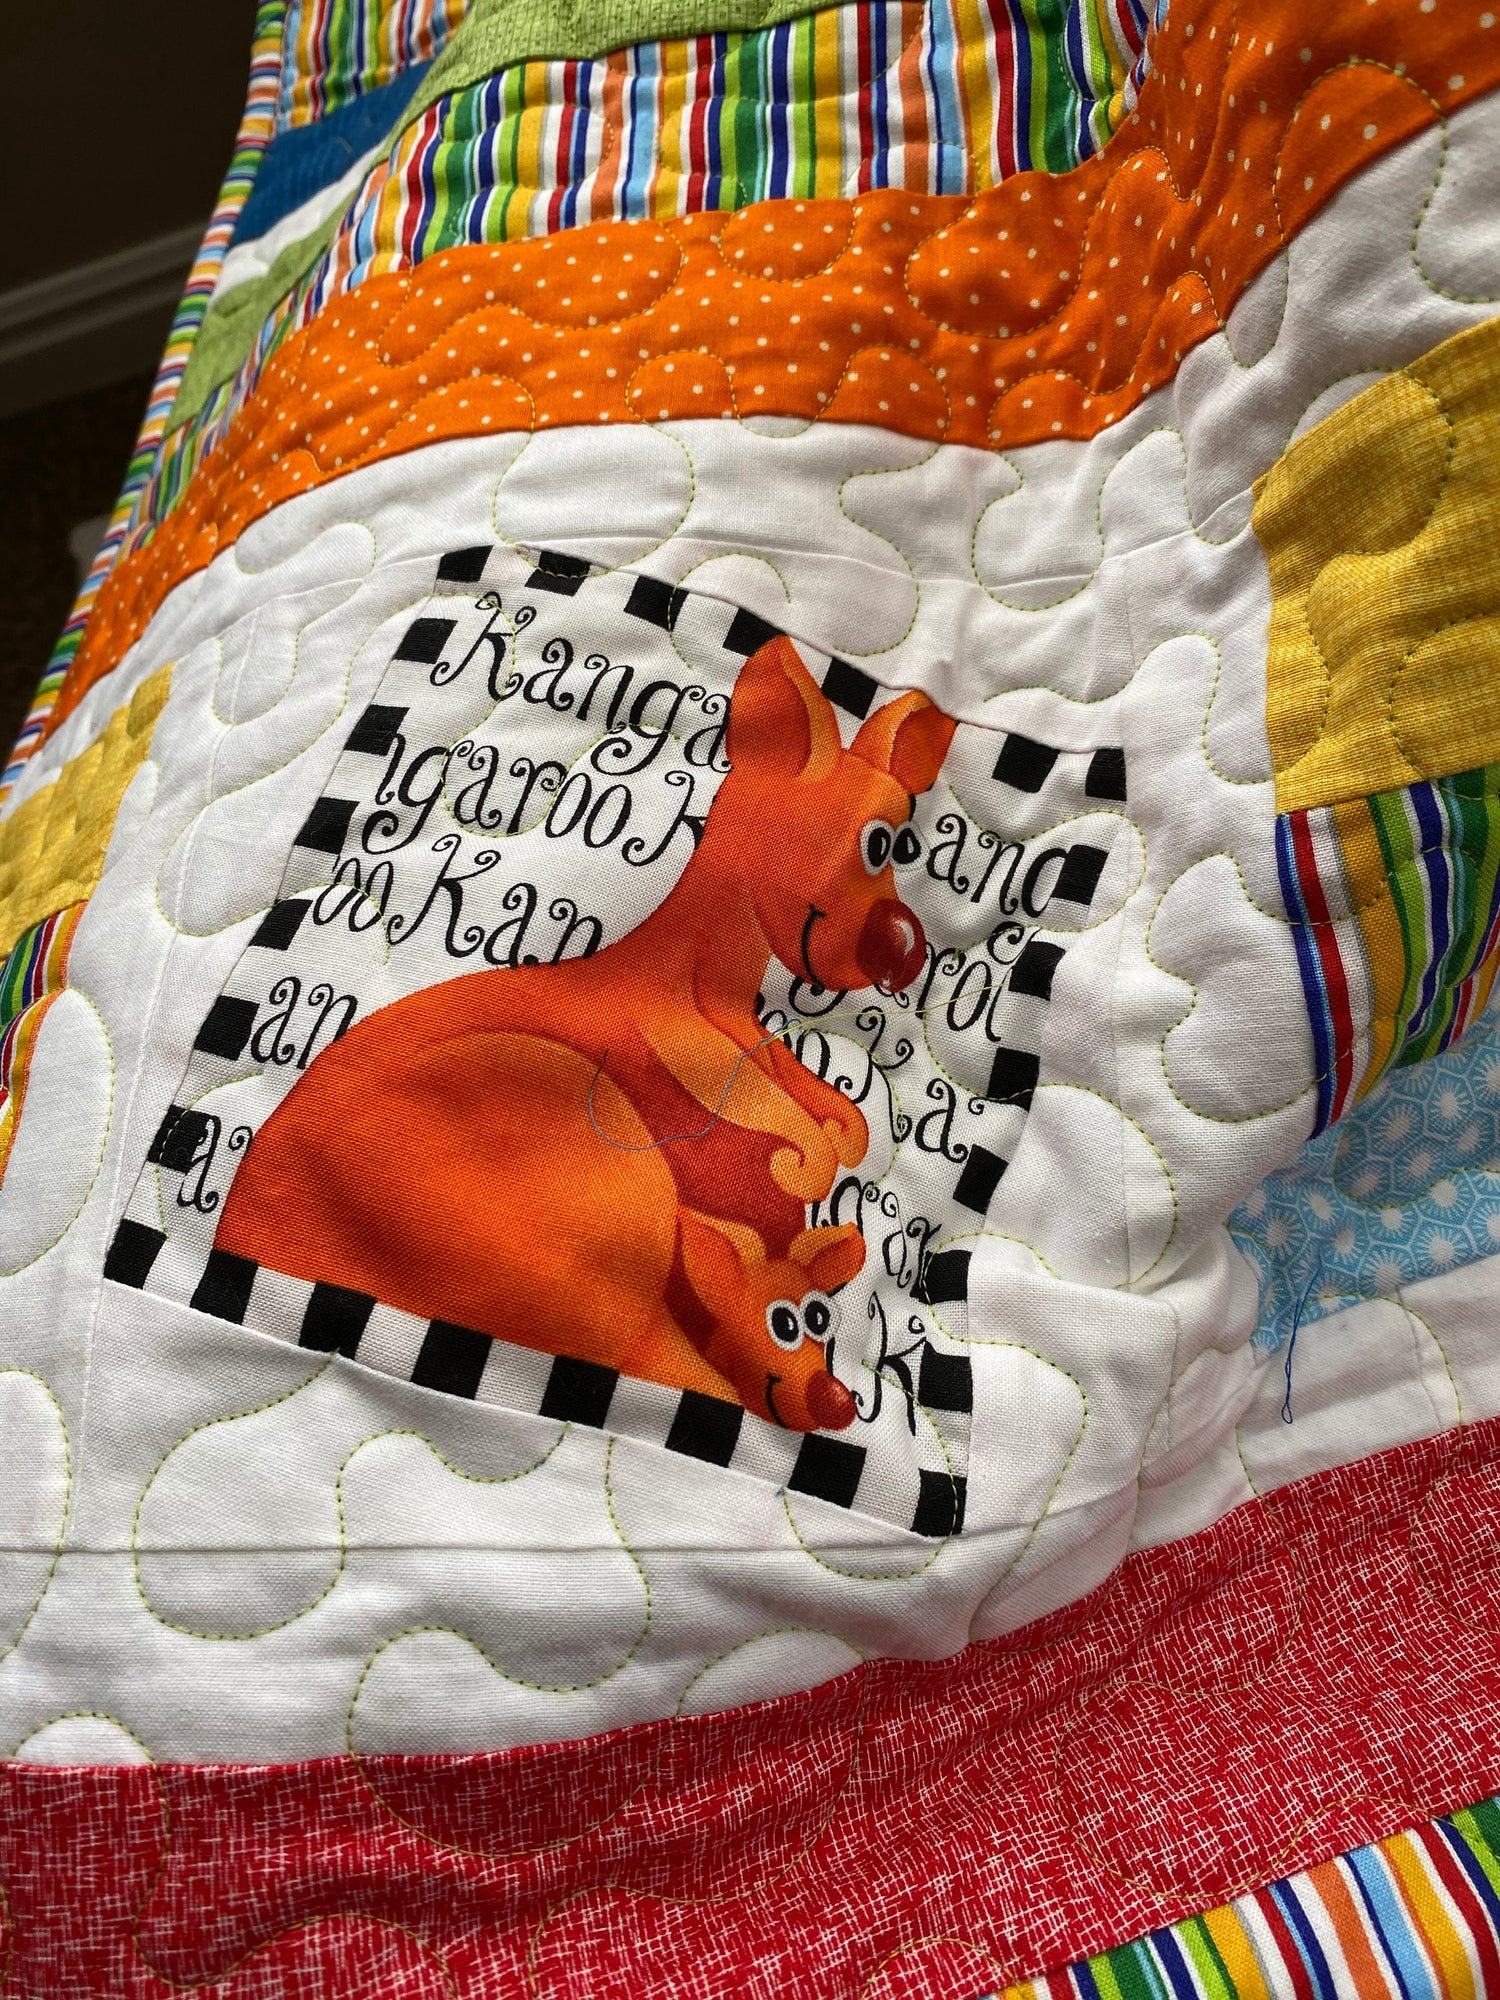 Animals Wonky Strip Quilt with Vibrant Fun Colors